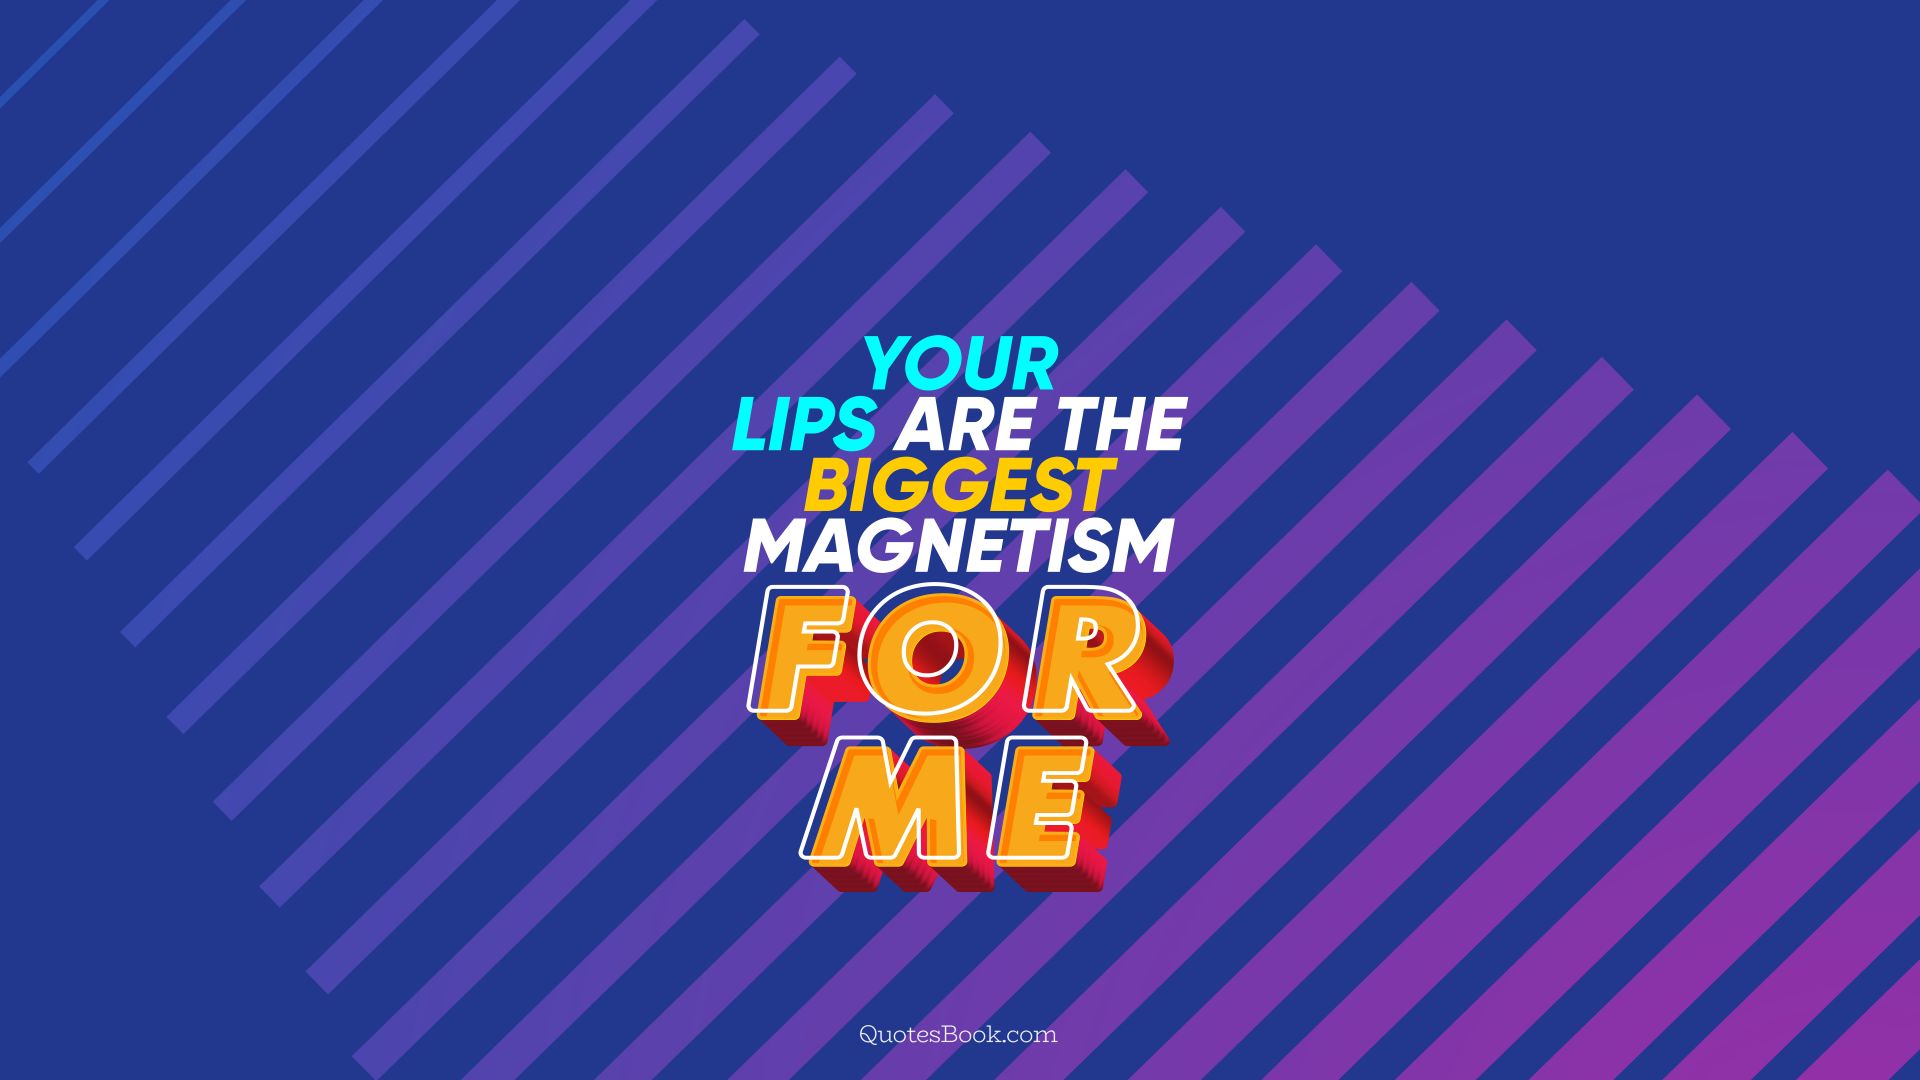 Your lips are the biggest magnetism for me. - Quote by QuotesBook